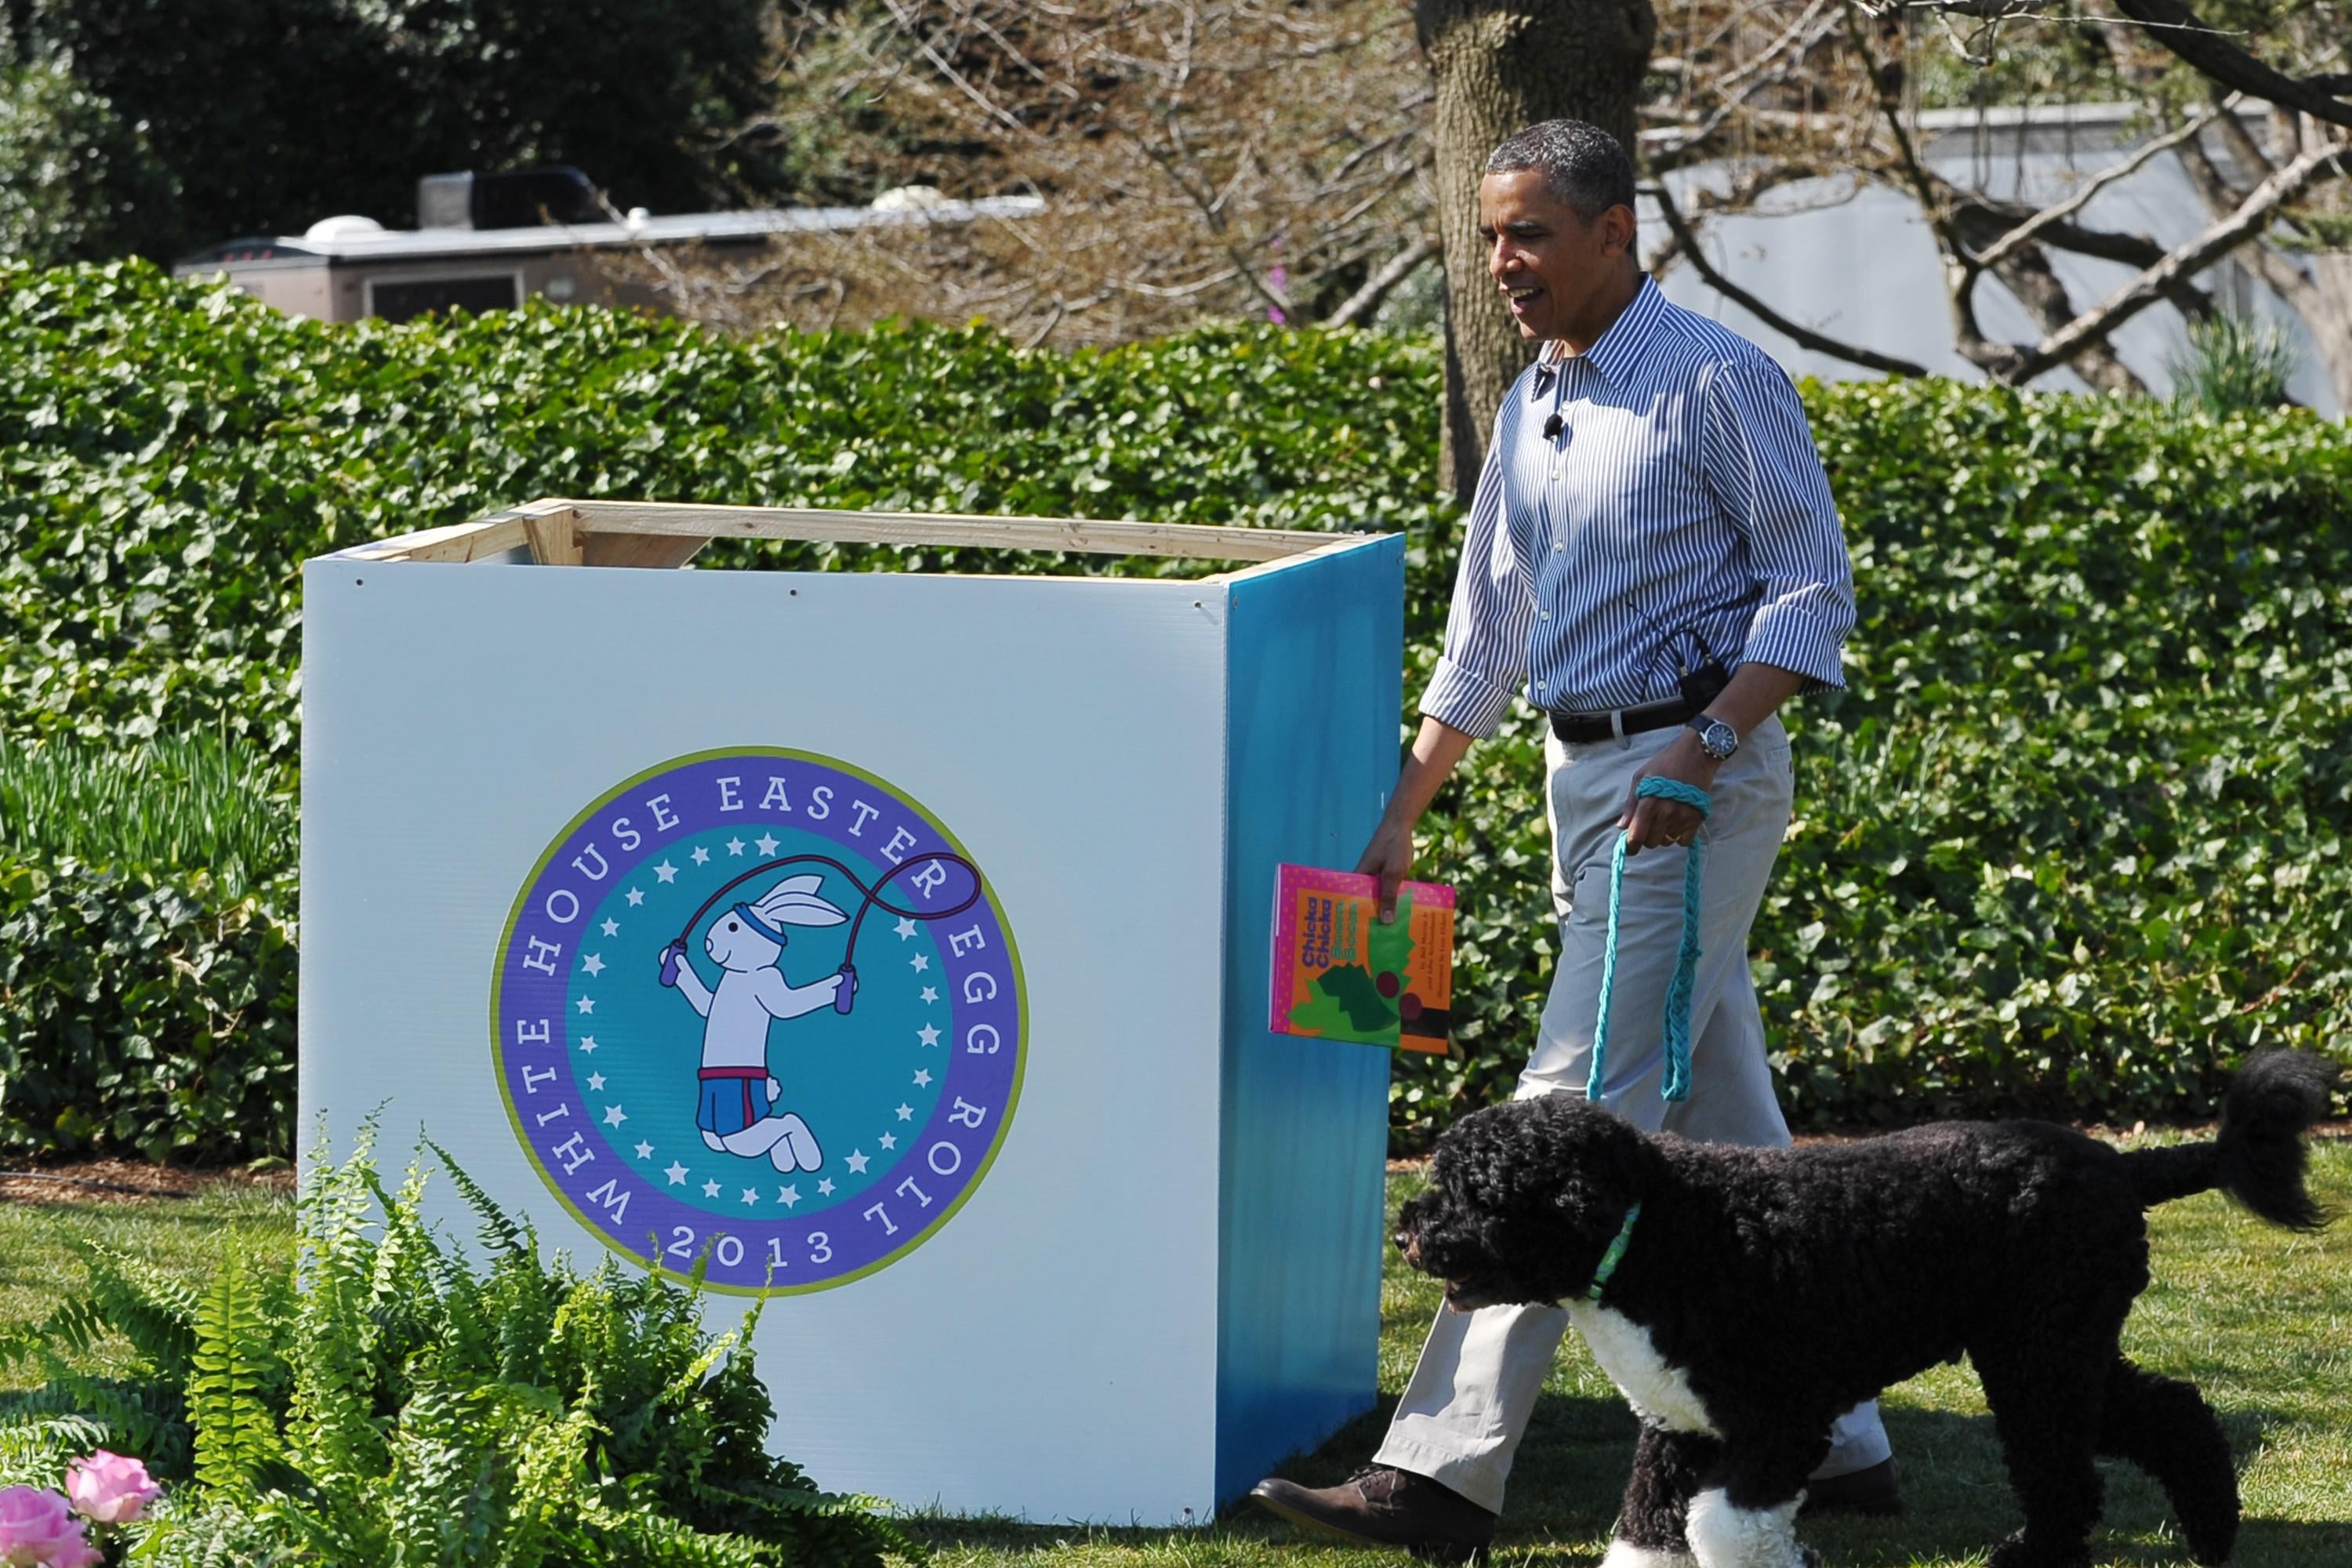 Then-President Barack Obama walks with Bo, the family dog, as he arrives to read a story to children attending the annual Easter Egg Roll on April 1, 2013 on the South Lawn of the White House in Washington, D.C.